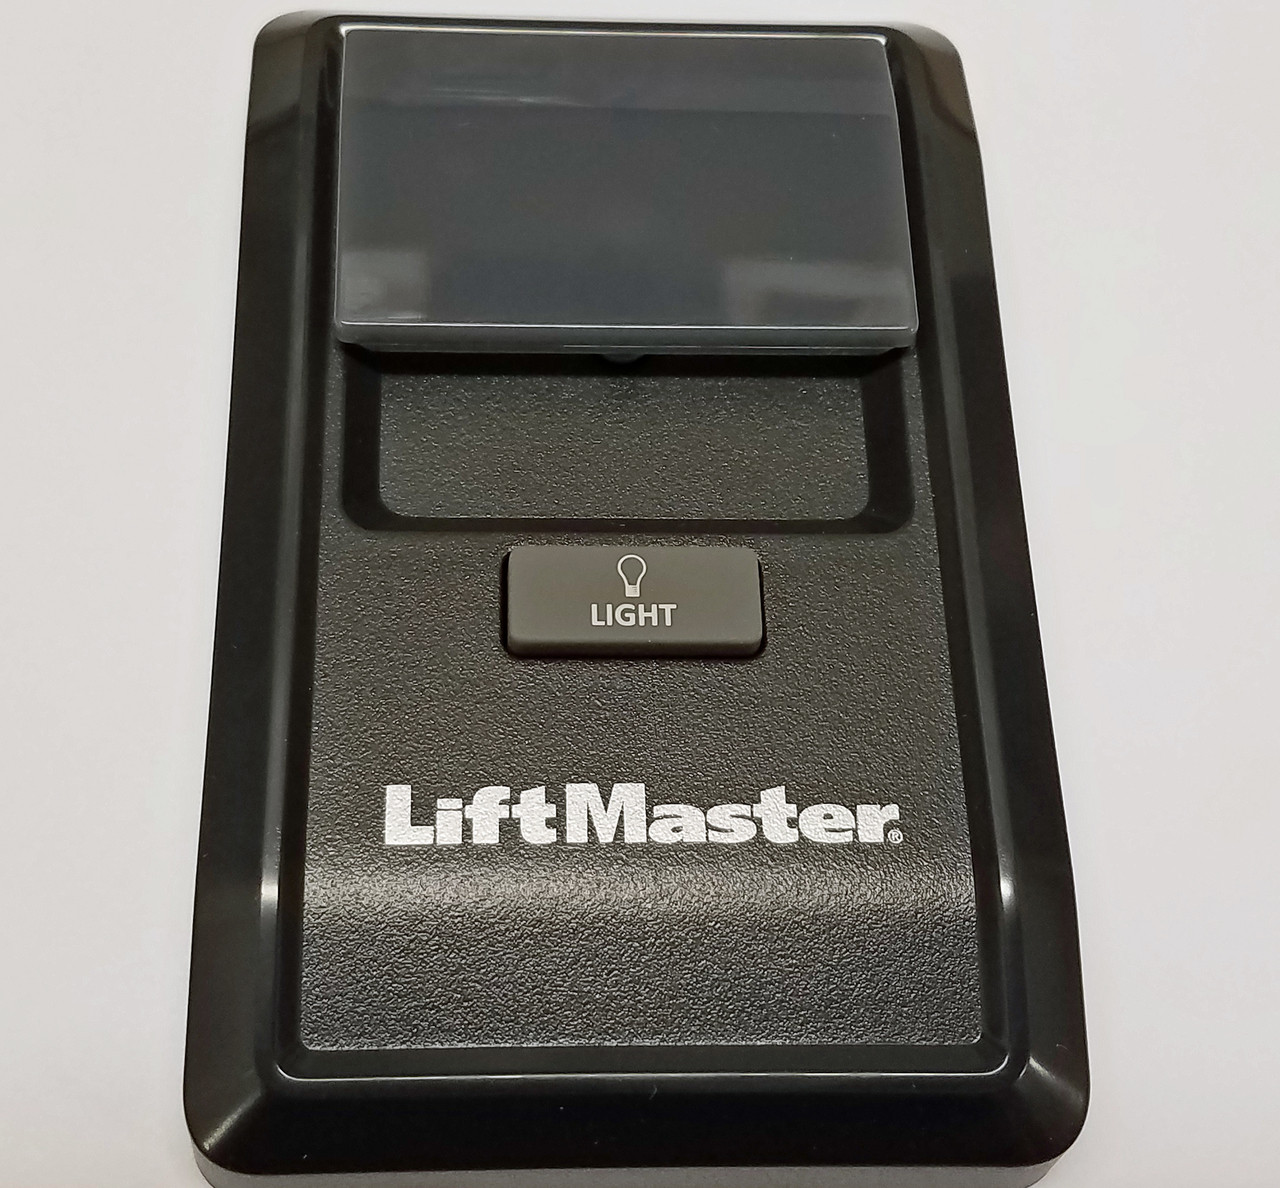 LiftMaster 888lm Security 2.0 MyQ Wall Control for sale online 